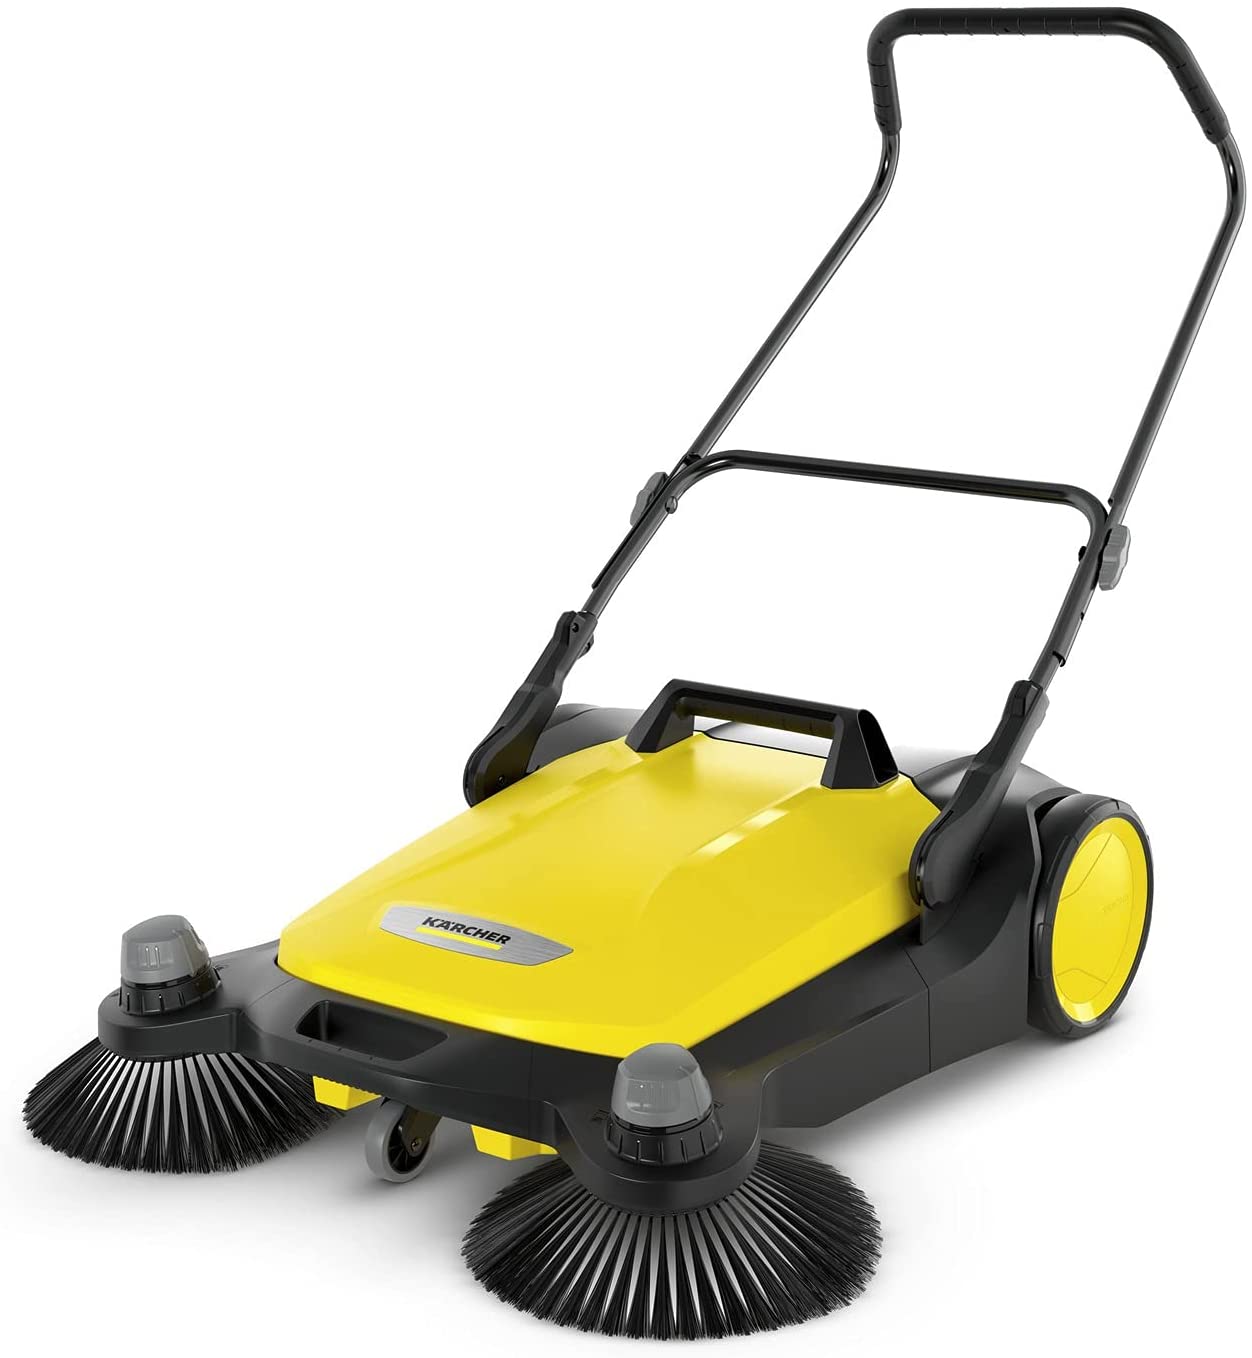 Karcher 1.766-461.0 S 6 Twin Push Sweeper